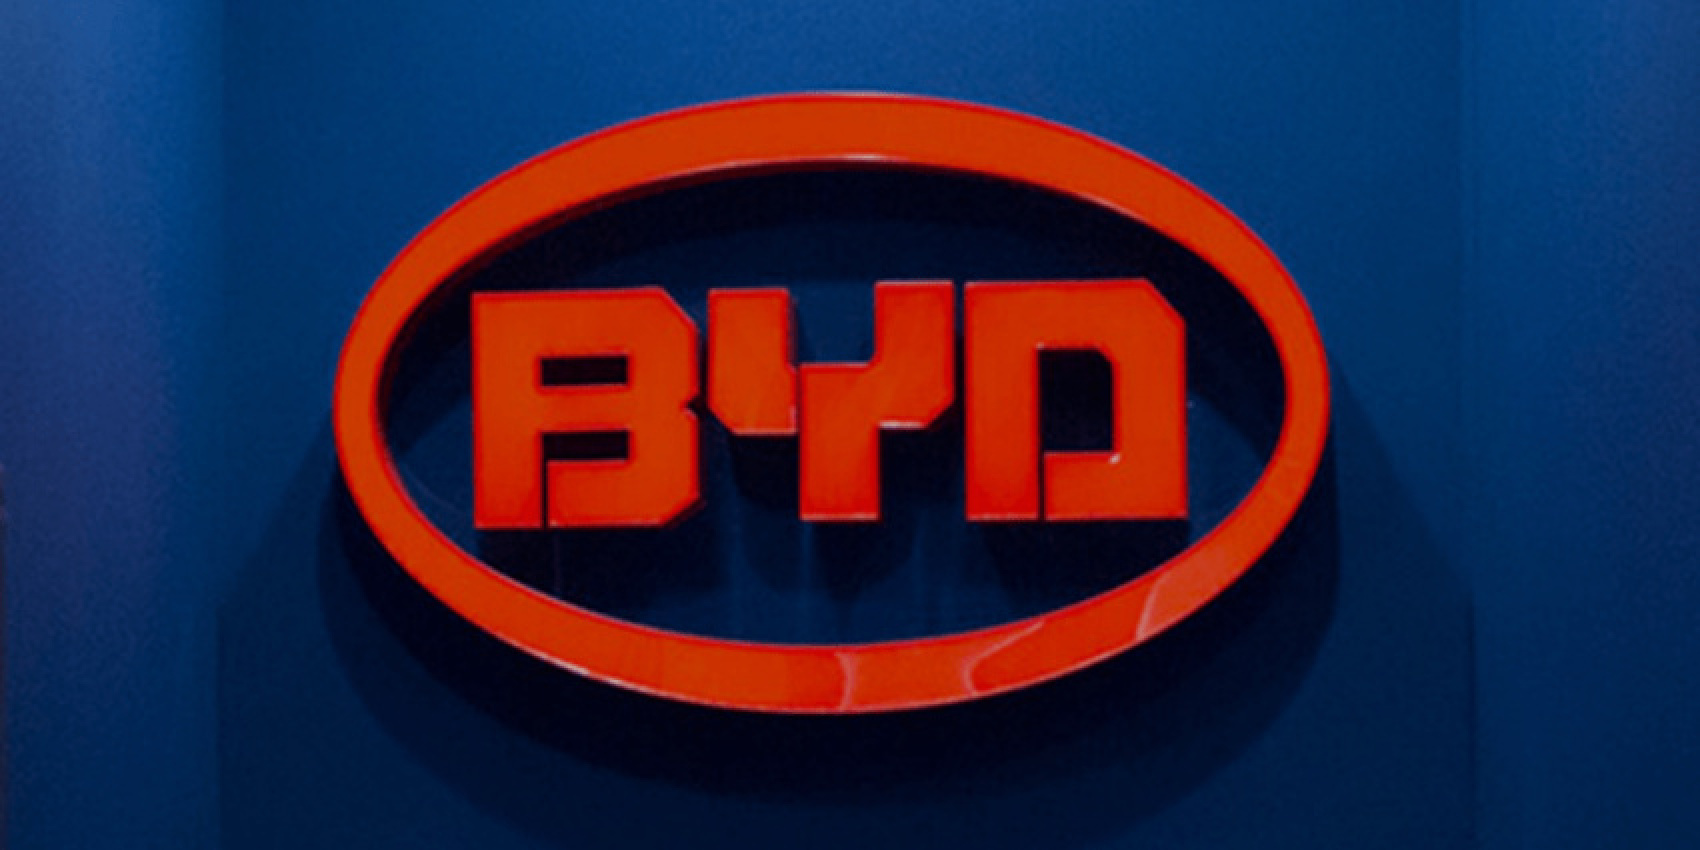 autos, battery & fuel cell, byd, cars, electric vehicle, batteries, battery production, china, guangxi, nanning, suppliers, byd to build another 45 gwh battery factory in guangxi